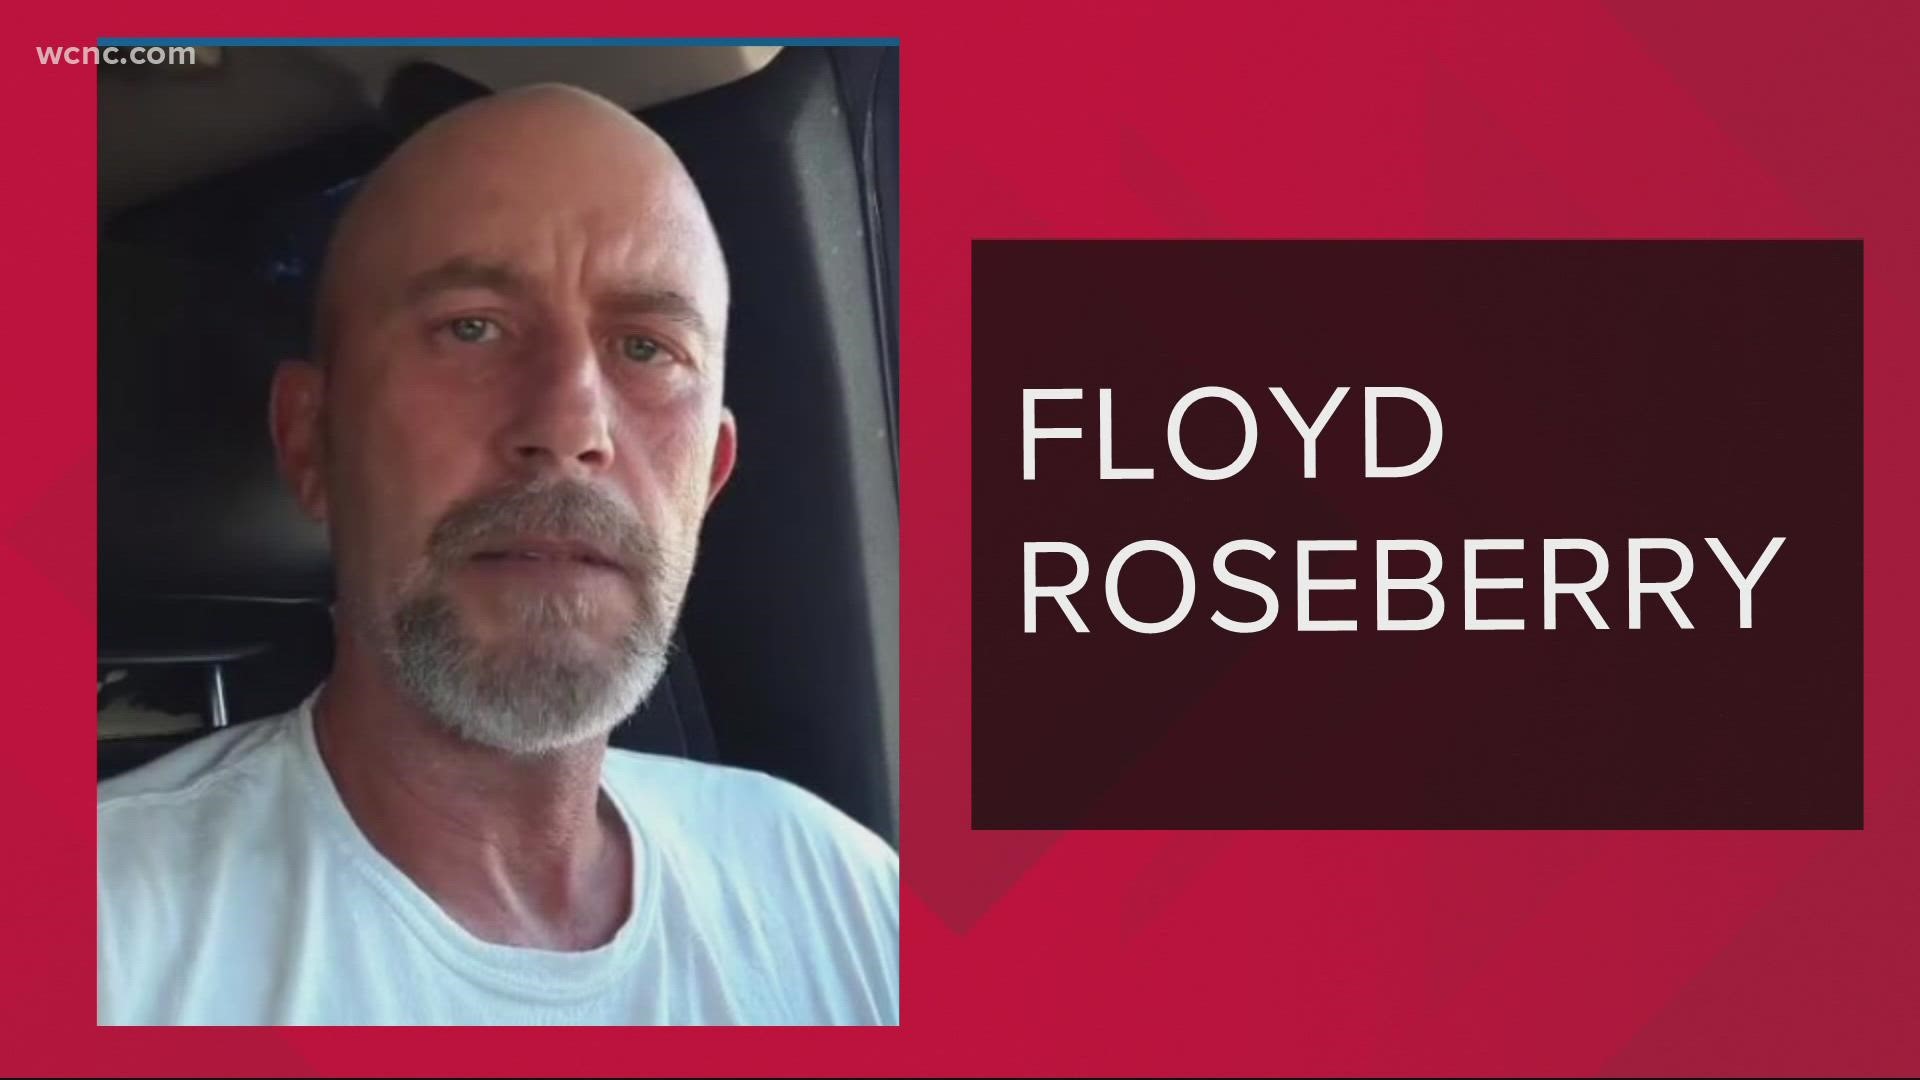 NBC's Meet the Press moderator Chuck Todd discusses what it was like to be so close to the threat when Floyd Roseberry was in a standoff with authorities.